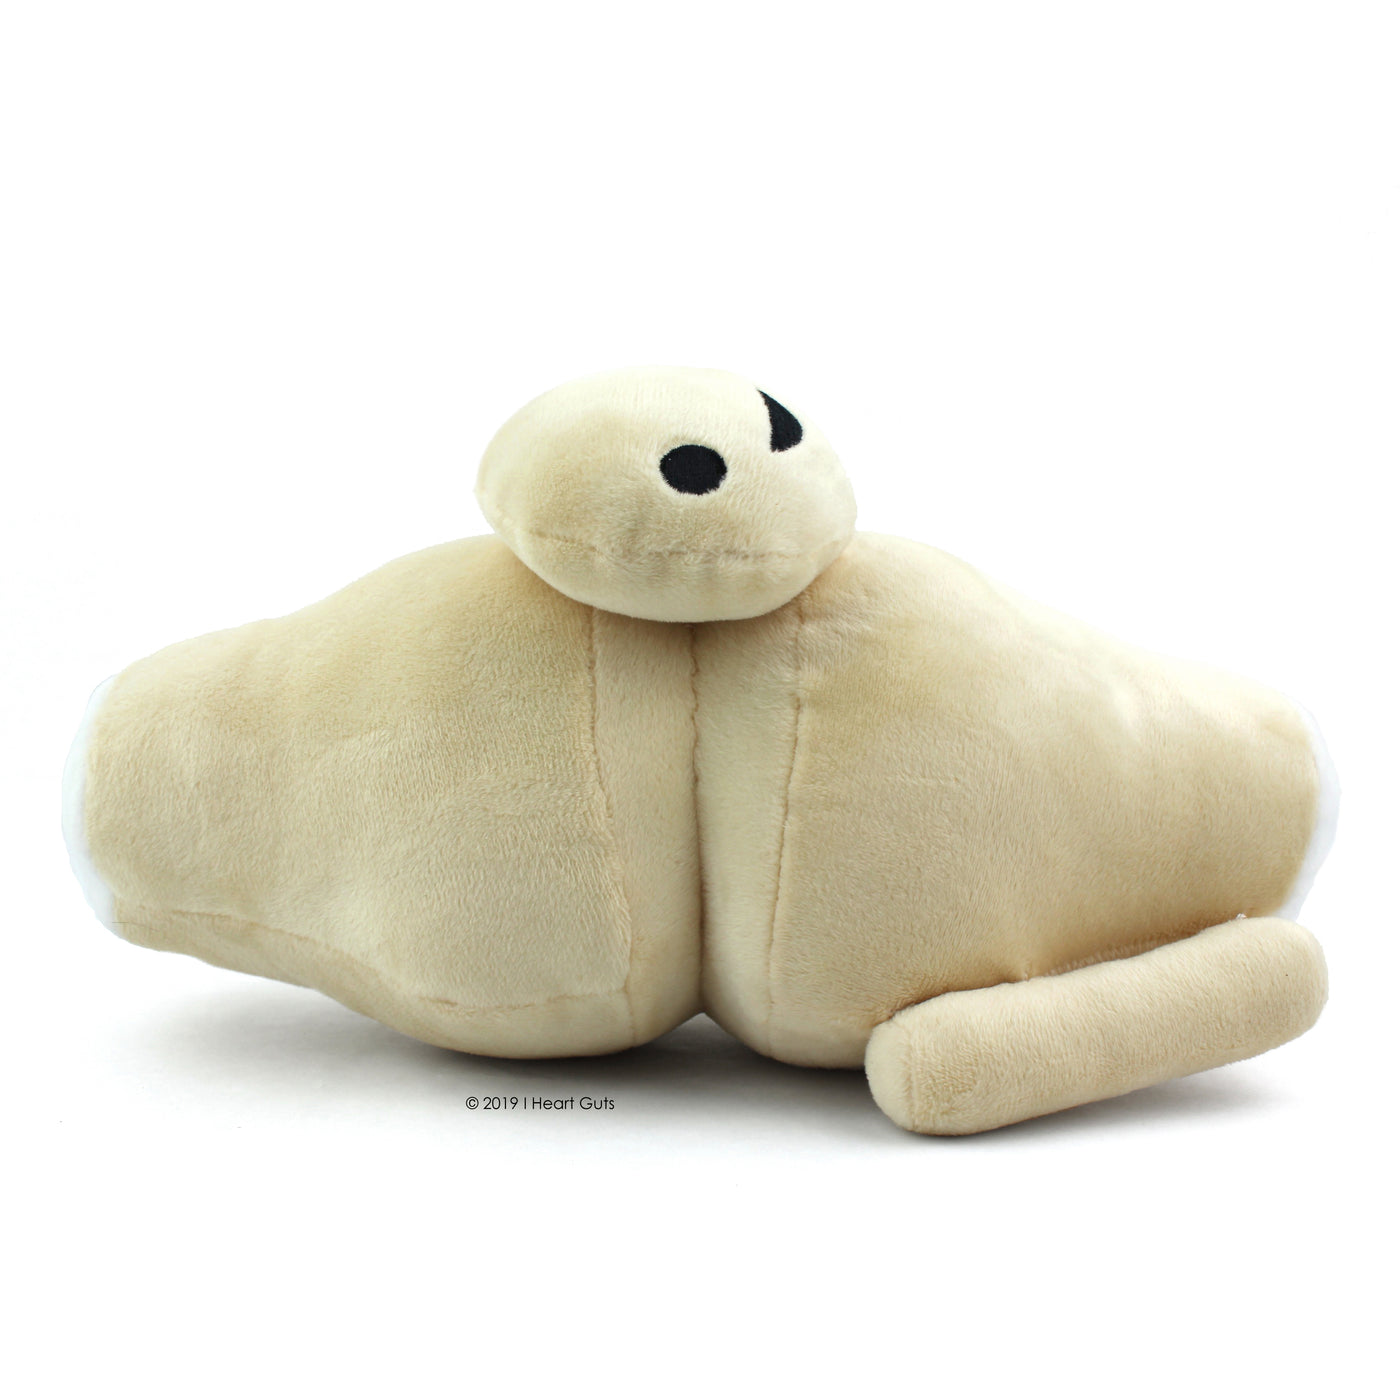 Knee Joint Plush - Kneed for Speed - Knee Replacement Gift - I Heart Guts